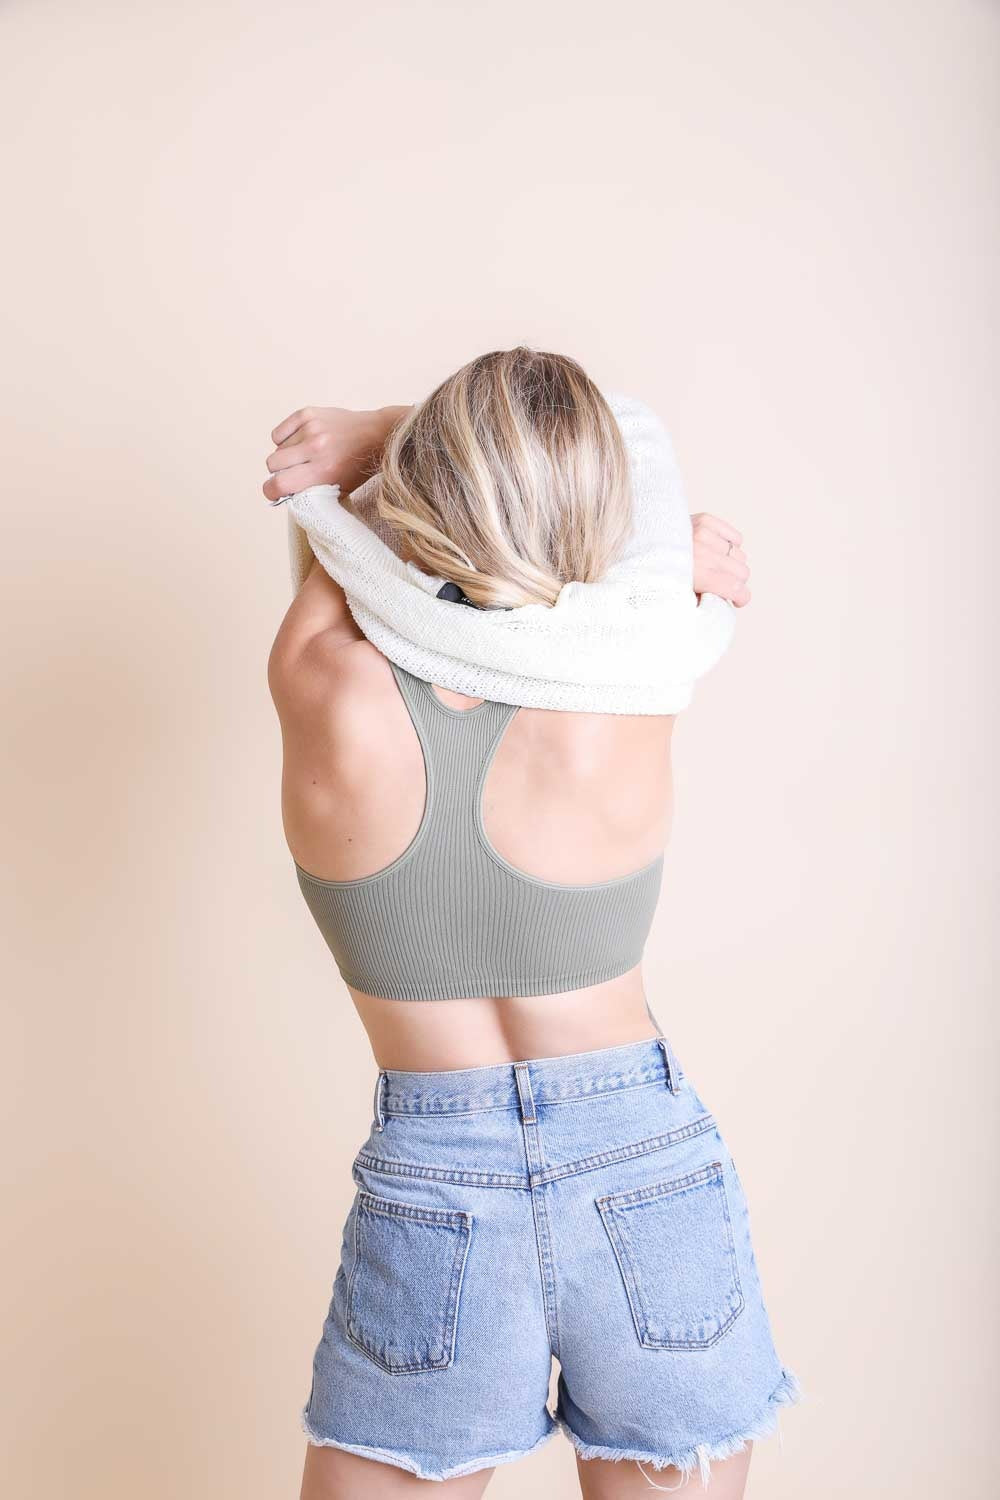 Leto Collection - Ribbed Racerback Bralette $18 – Thank you